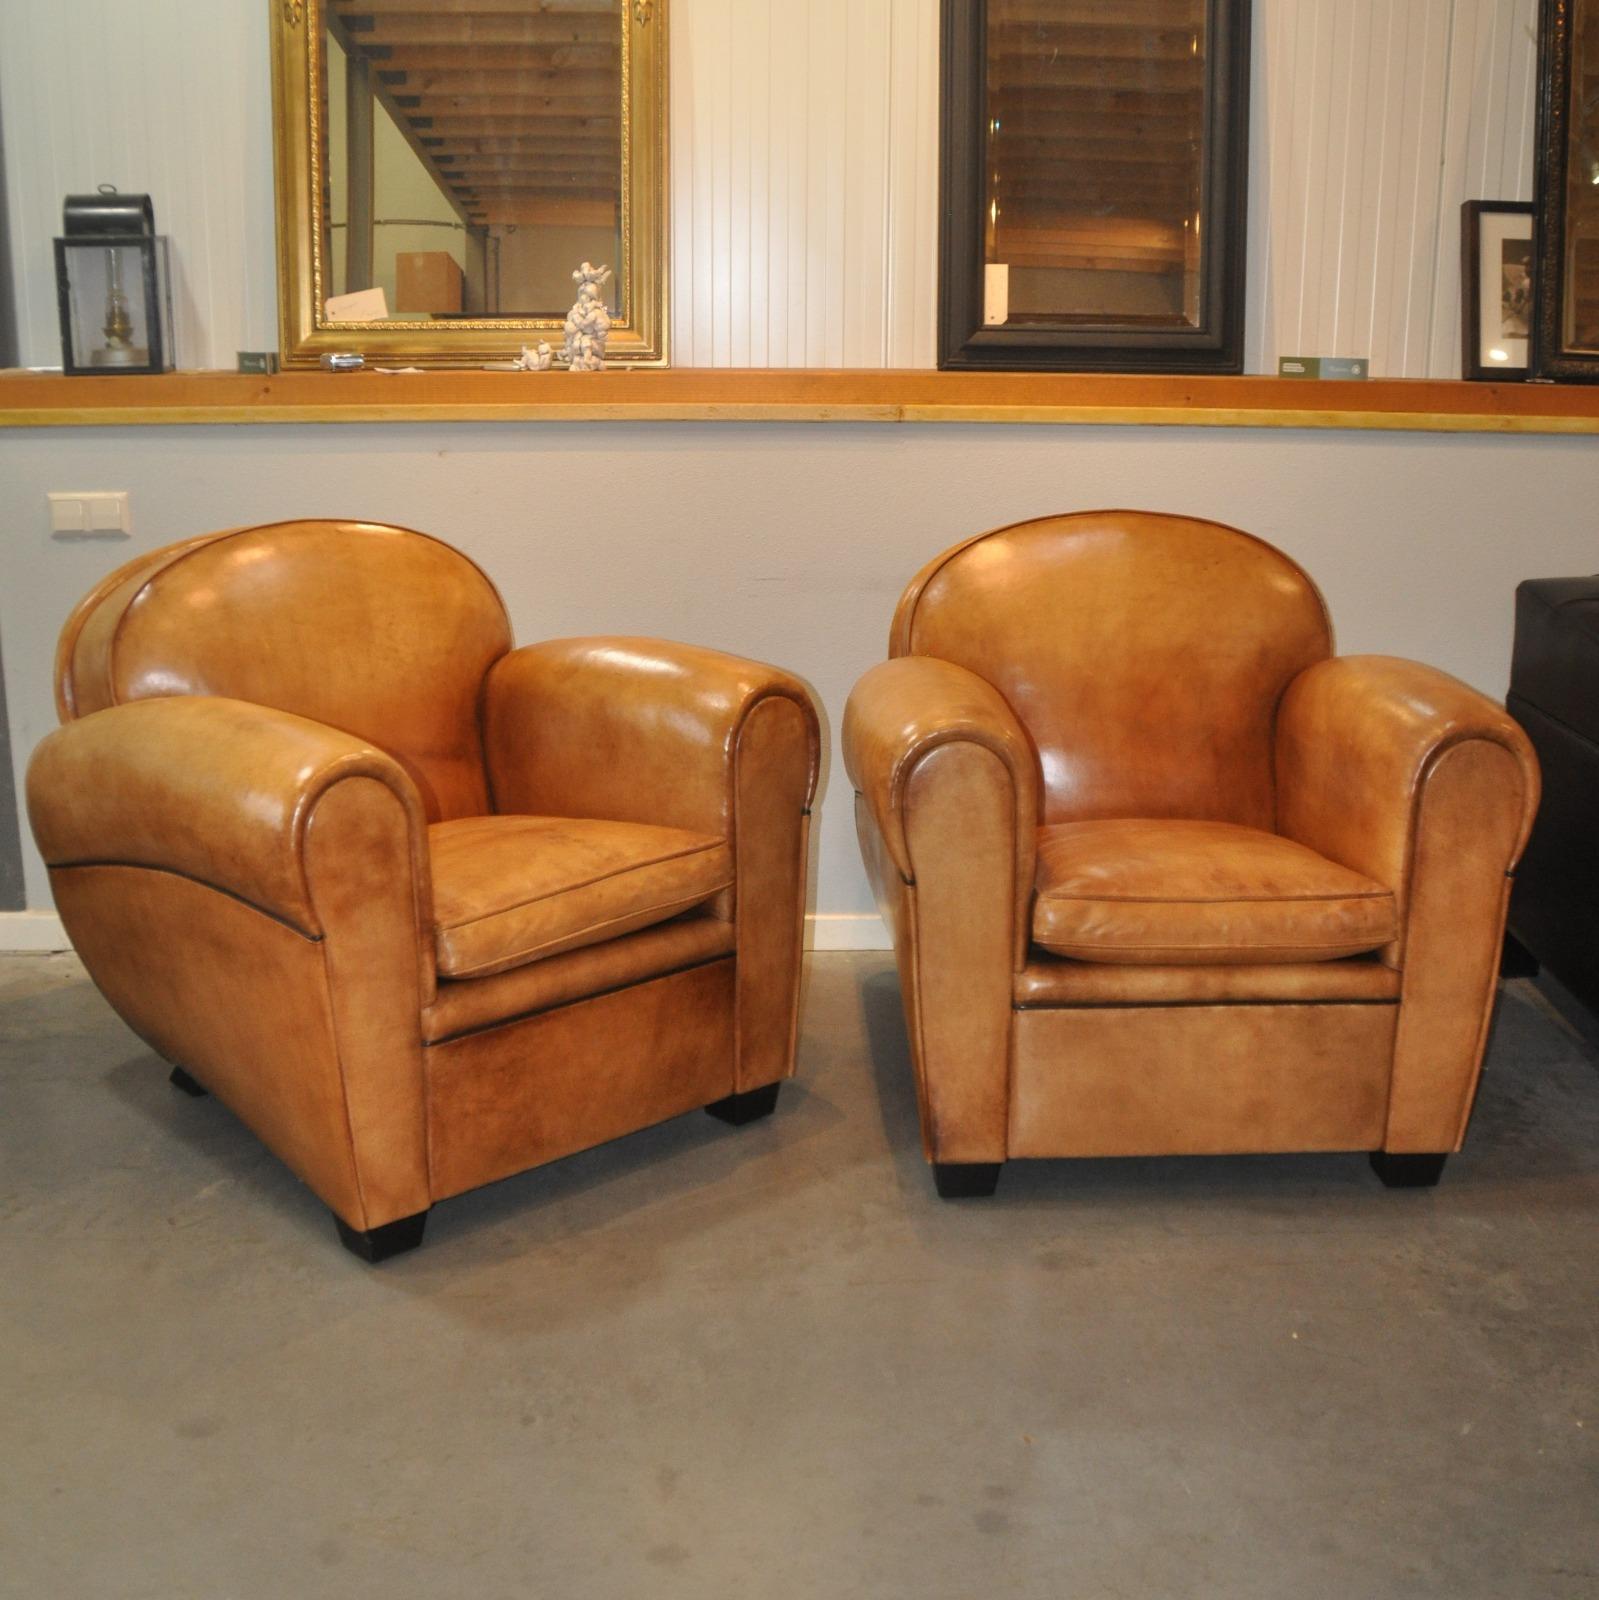 Set of Two Art Deco style armchairs and hocker by Bart van Bekhoven Model 'Witlam' in Sheep Leather from the Netherlands 1970s. These armchairs in Art Deco style are finished with black and colored piping. Loose seat cushion. The set is in new